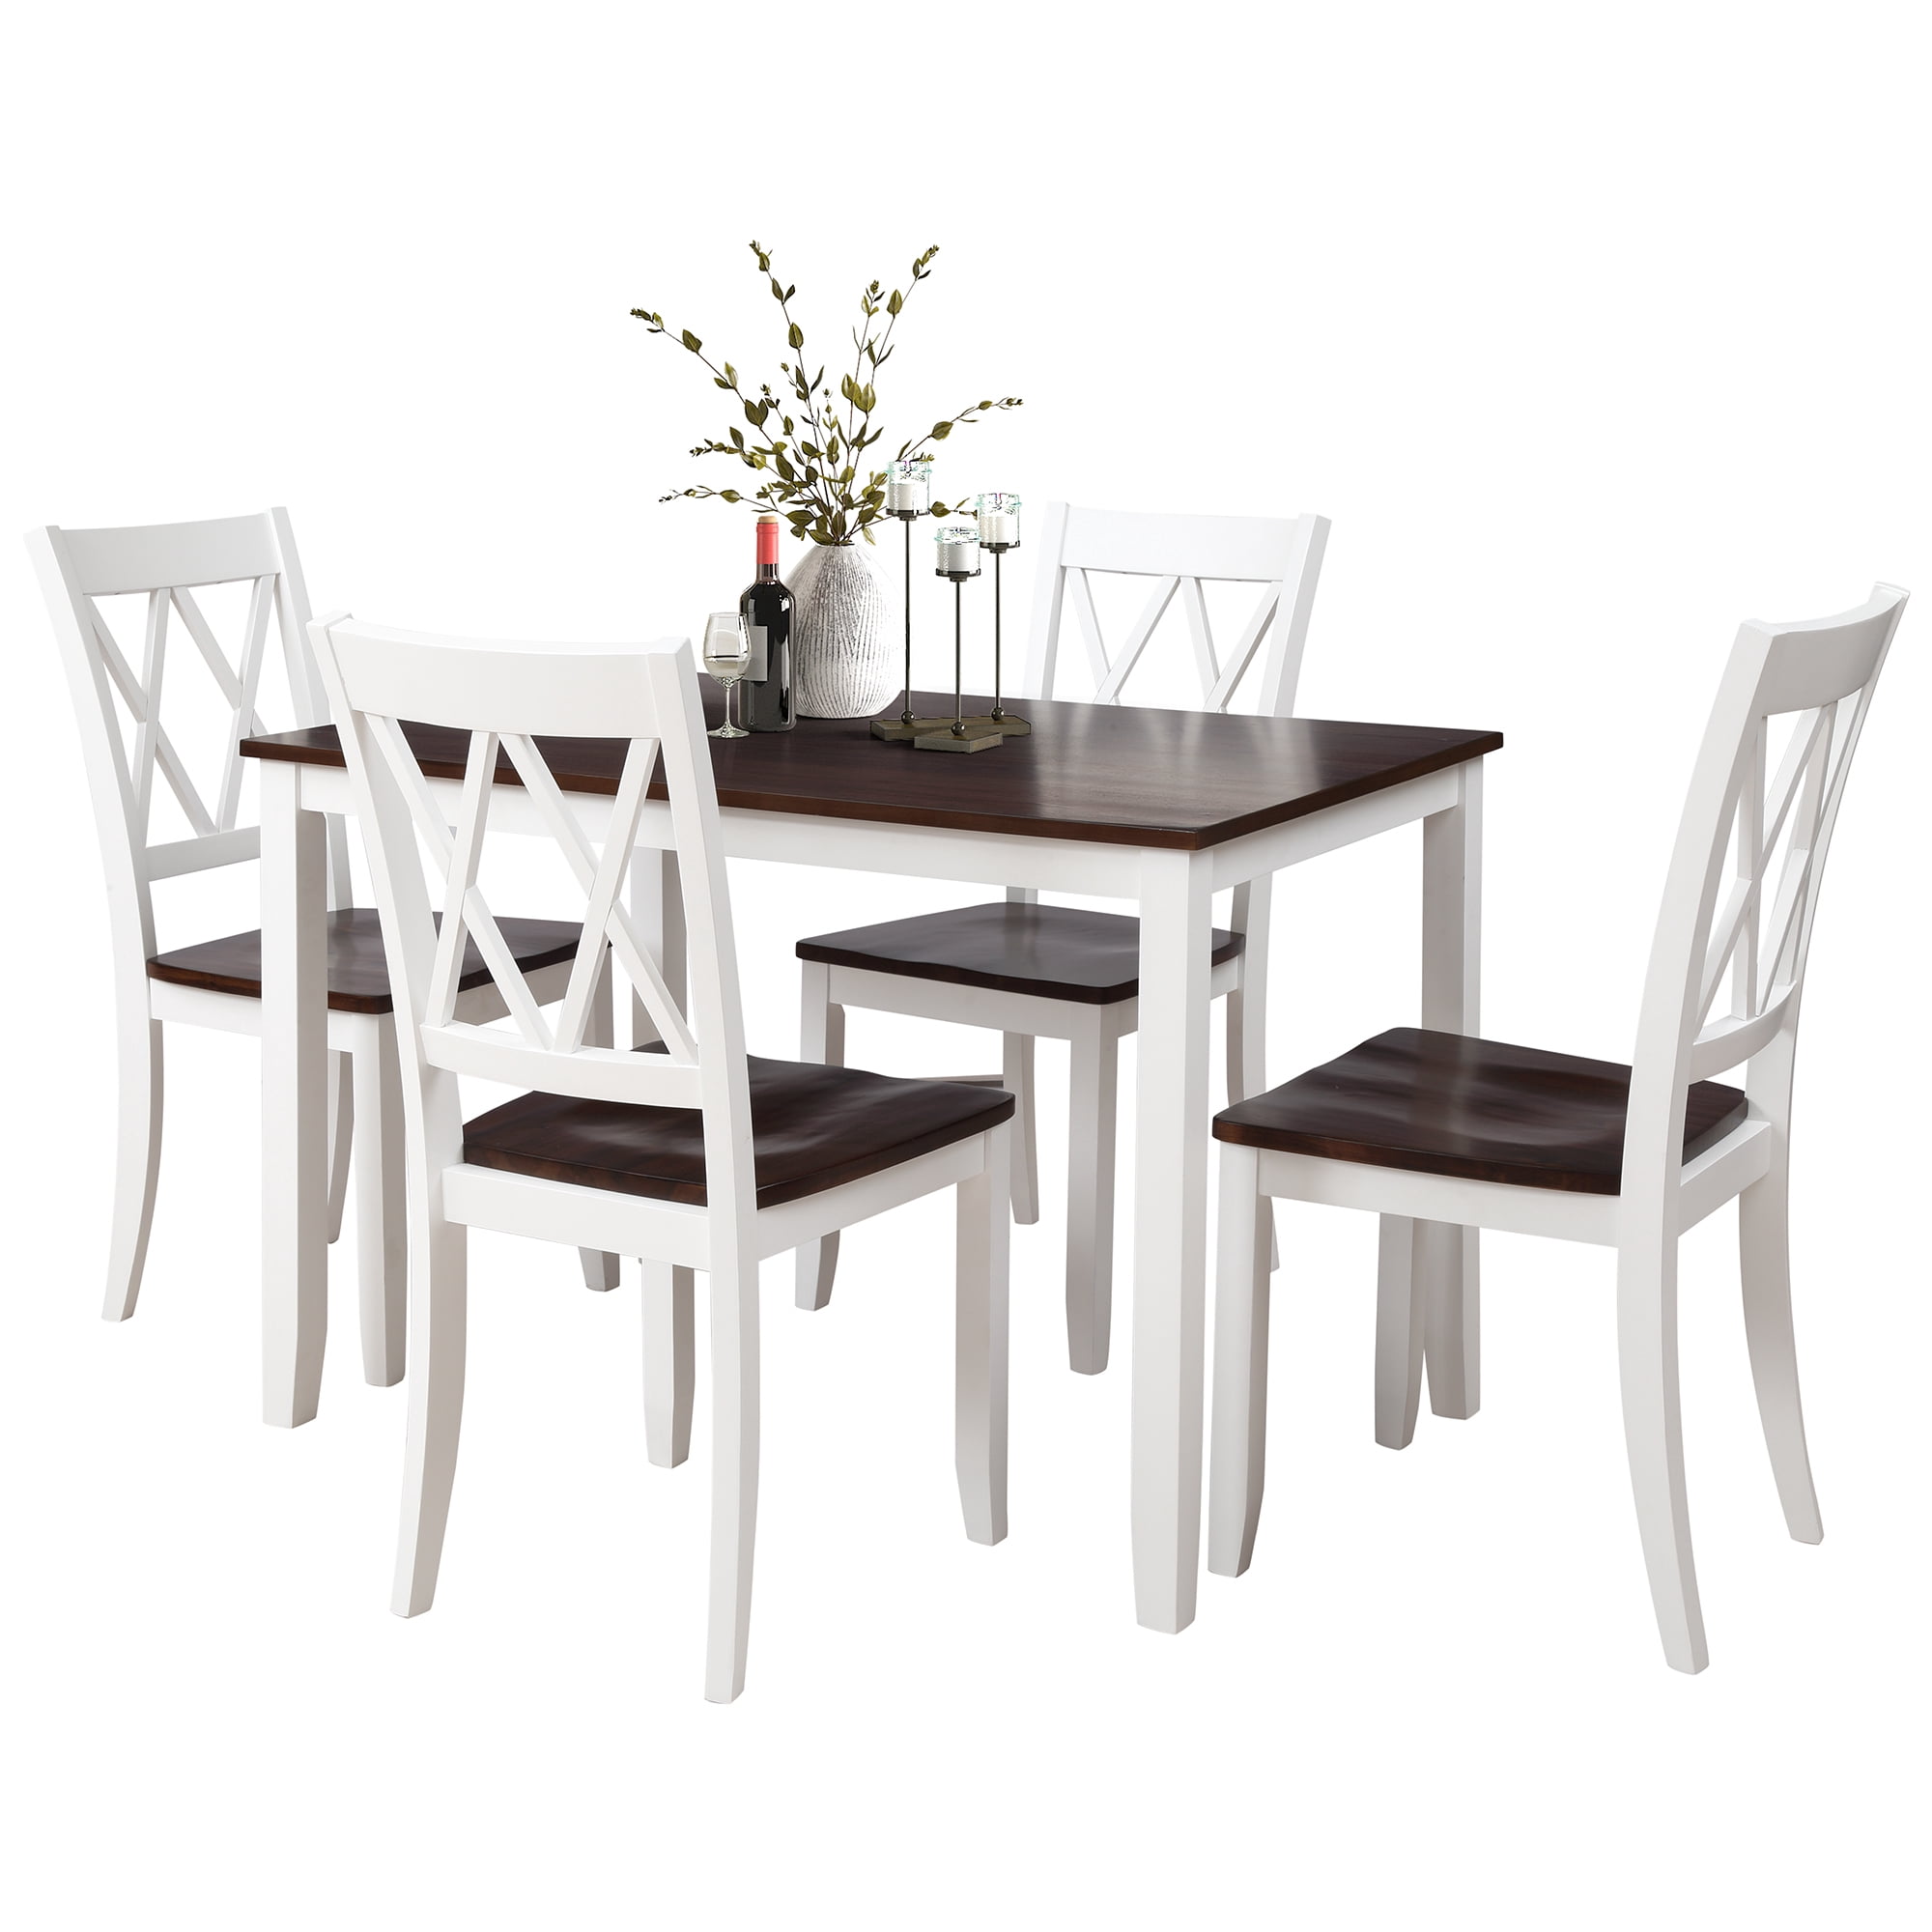 White Dining Table Set For 4